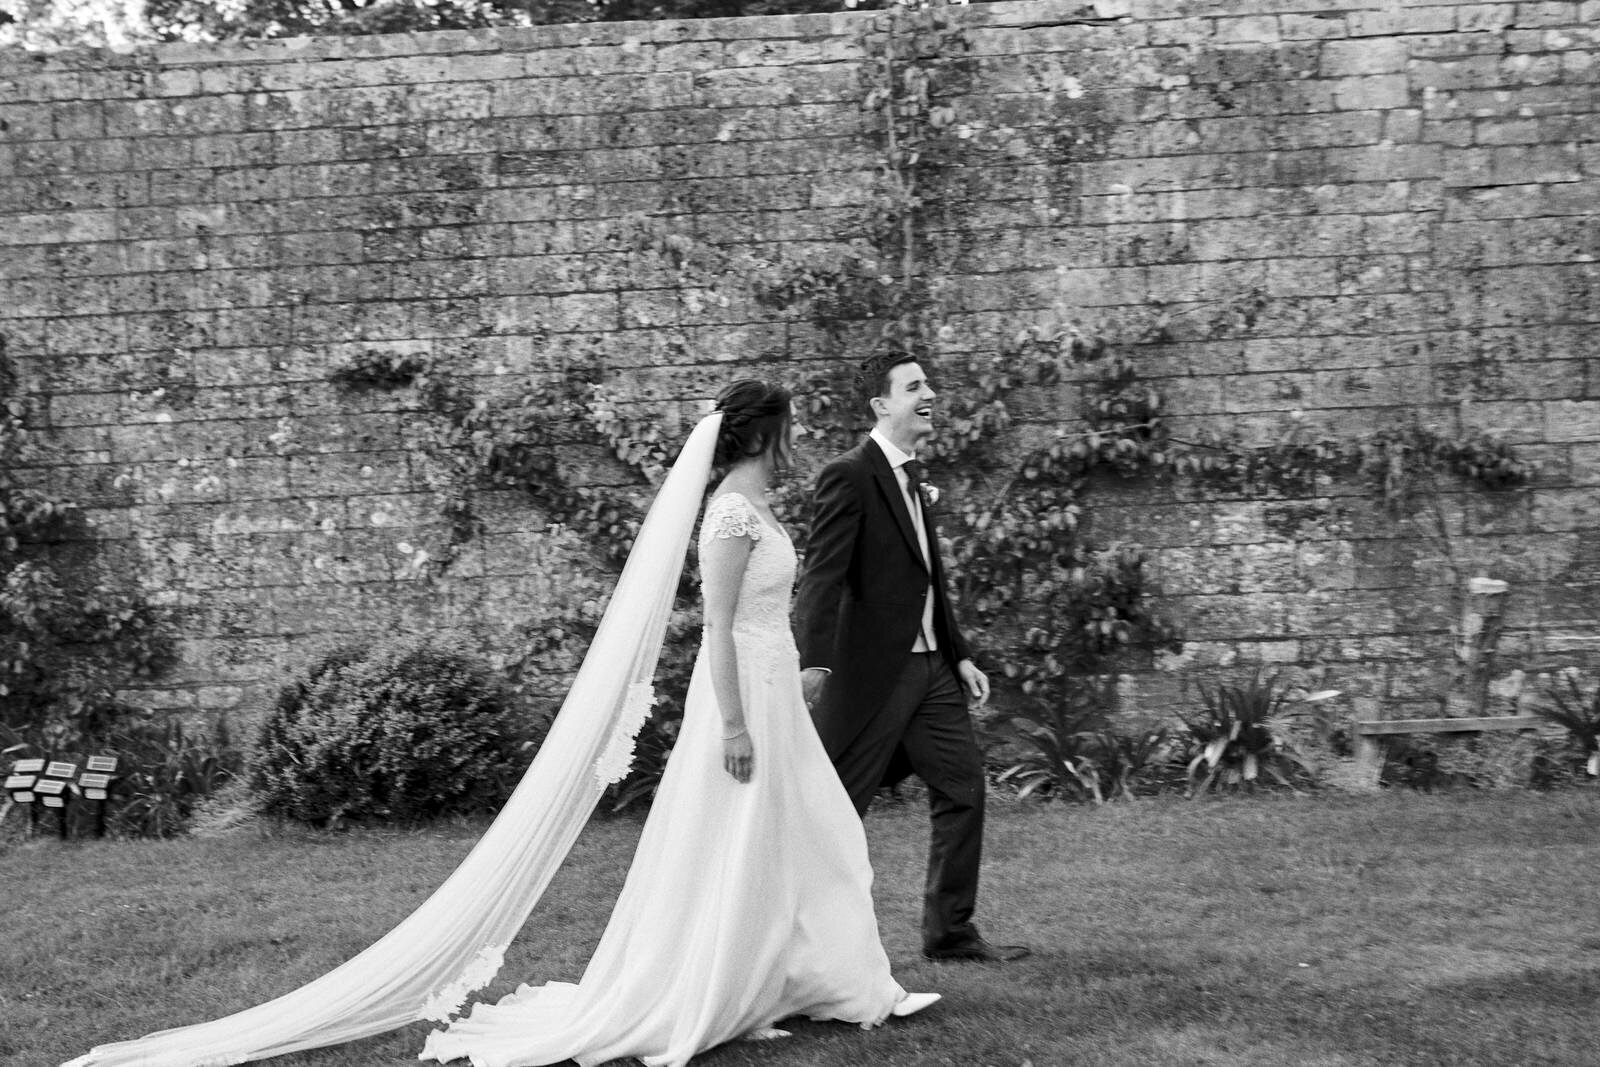 Black and white photo of bride and groom walking past stone walled garden